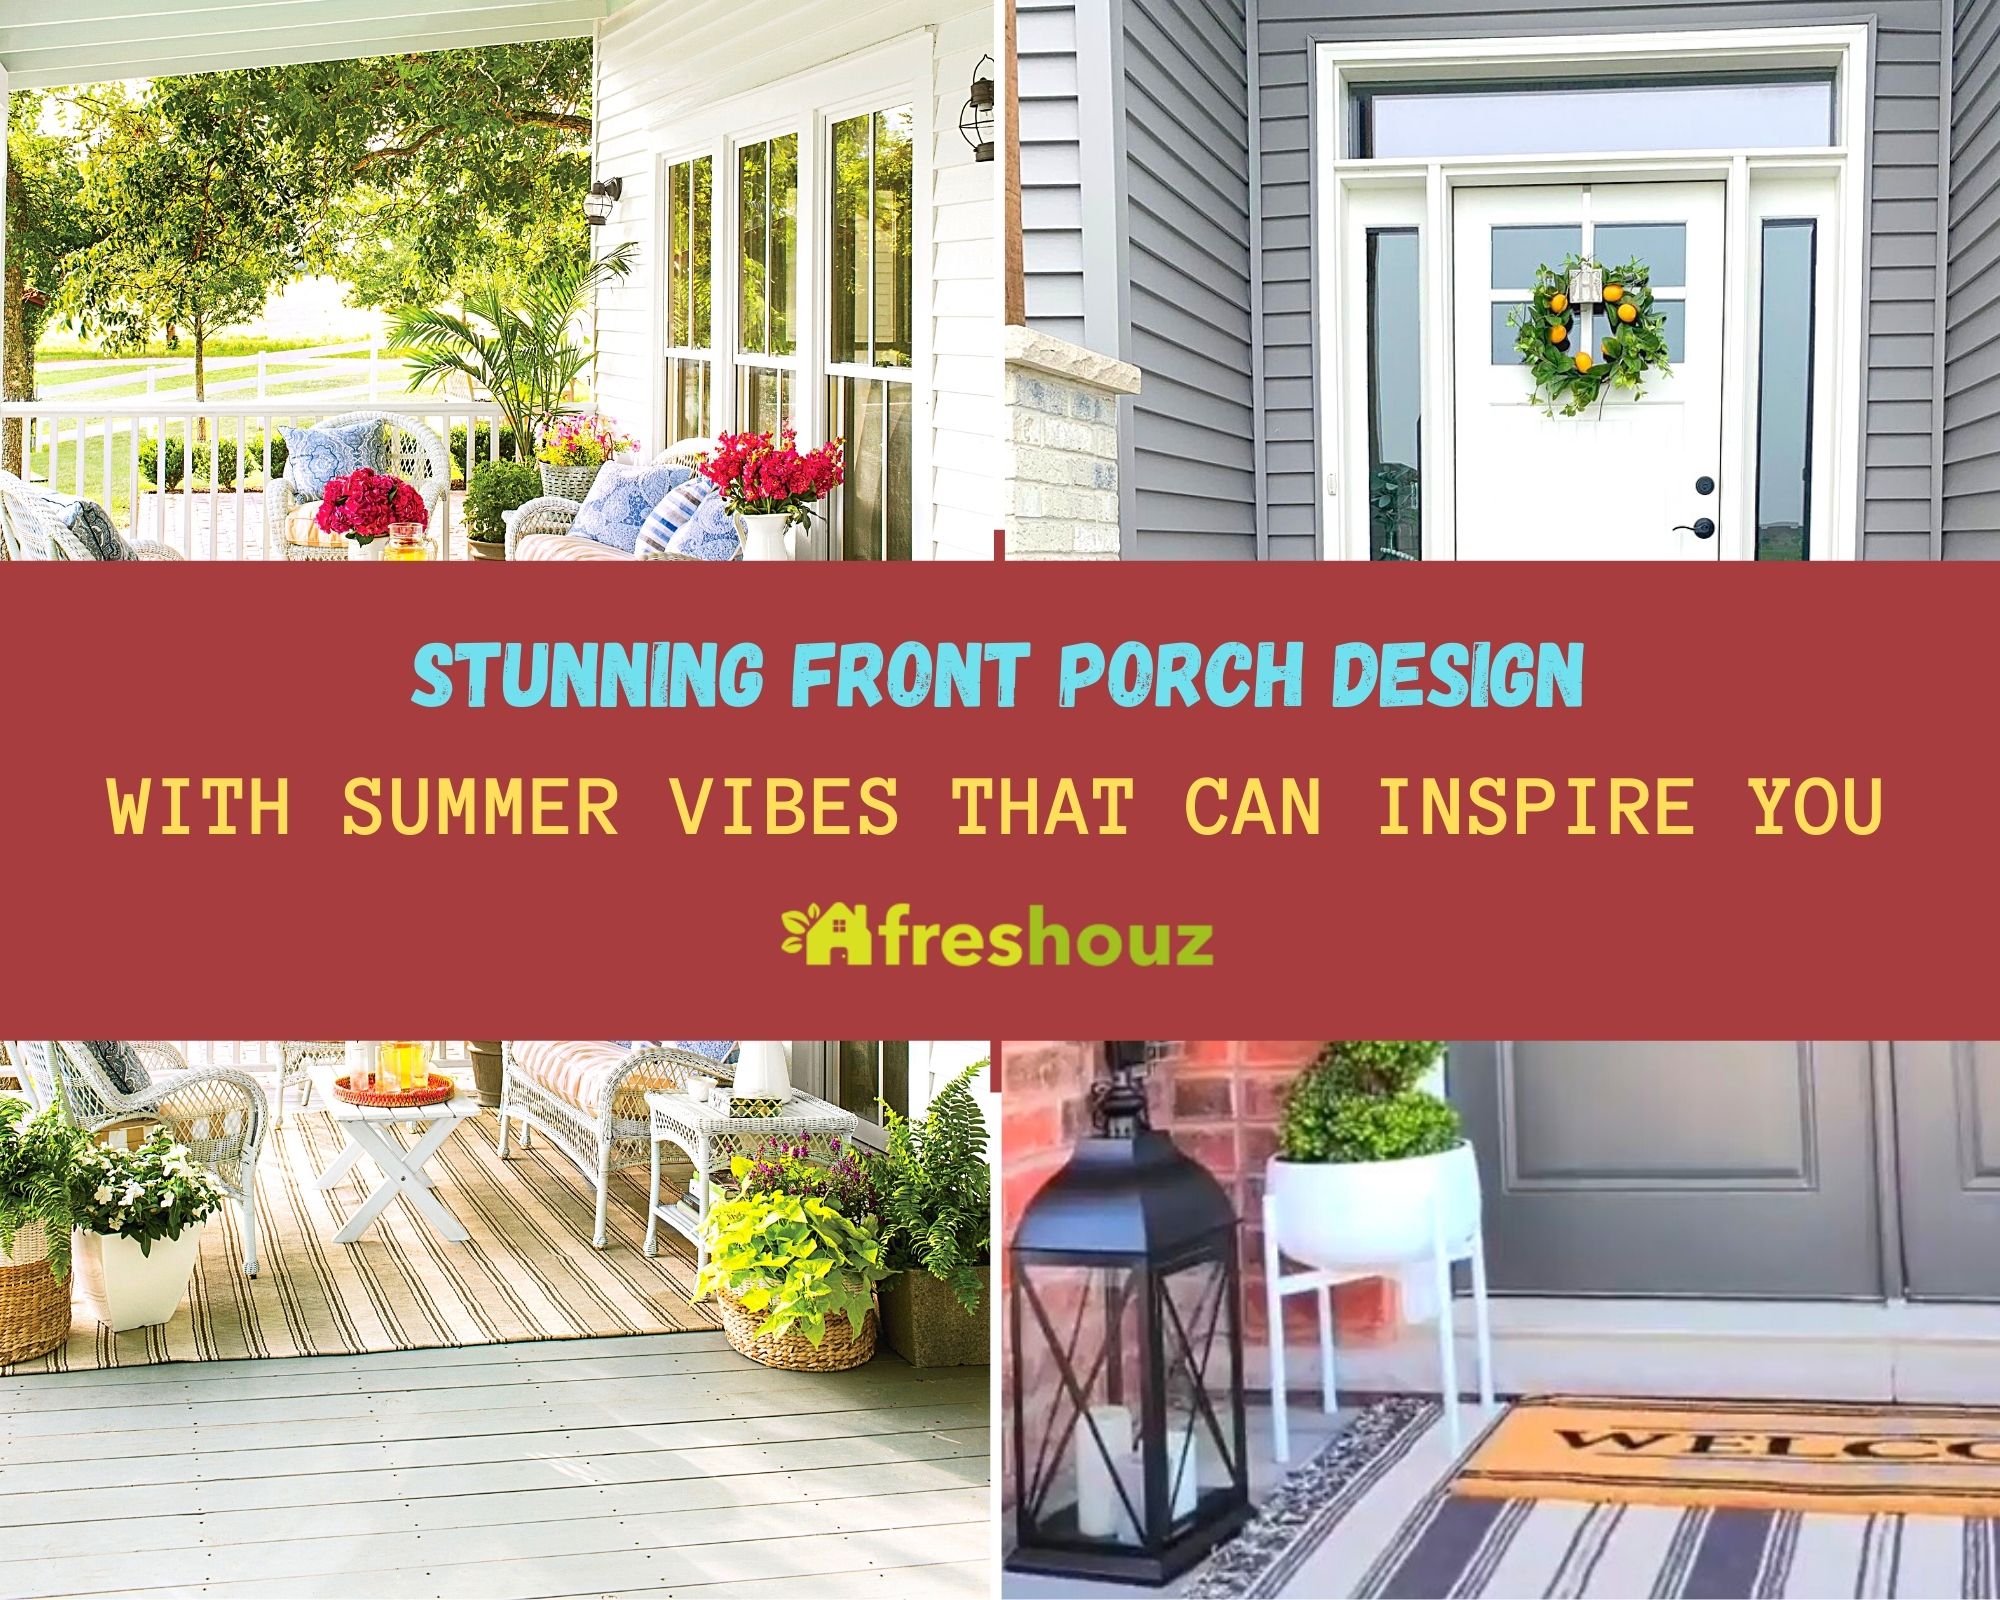 Stunning Front Porch Design With Summer Vibes That Can Inspire You